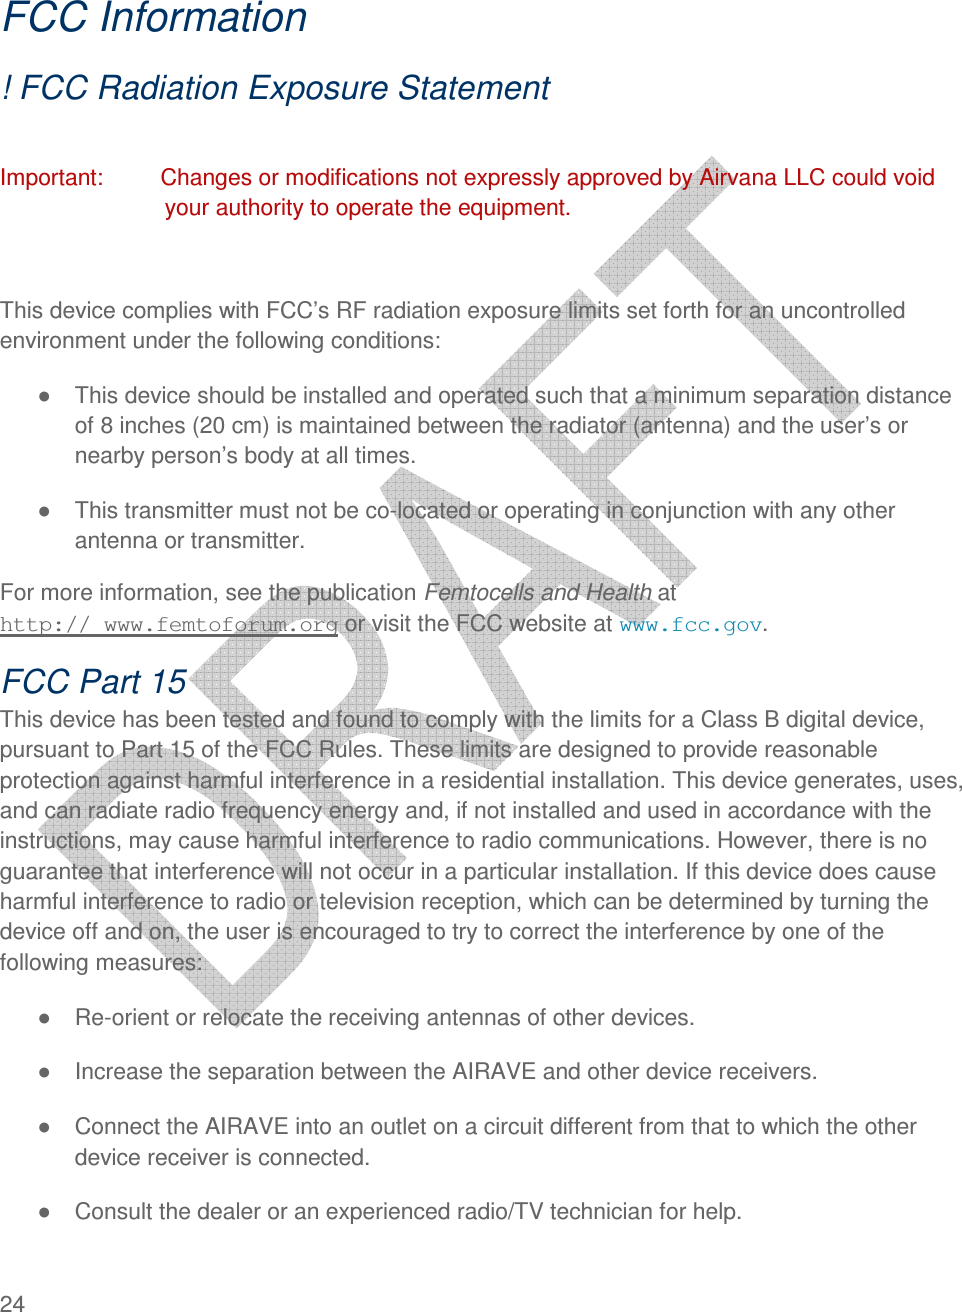  24    FCC Information ! FCC Radiation Exposure Statement  Important:         Changes or modifications not expressly approved by Airvana LLC could void your authority to operate the equipment.  This device complies with FCC’s RF radiation exposure limits set forth for an uncontrolled environment under the following conditions: ●  This device should be installed and operated such that a minimum separation distance of 8 inches (20 cm) is maintained between the radiator (antenna) and the user’s or nearby person’s body at all times. ●  This transmitter must not be co-located or operating in conjunction with any other antenna or transmitter. For more information, see the publication Femtocells and Health at  http:// www.femtoforum.org or visit the FCC website at www.fcc.gov. FCC Part 15 This device has been tested and found to comply with the limits for a Class B digital device, pursuant to Part 15 of the FCC Rules. These limits are designed to provide reasonable protection against harmful interference in a residential installation. This device generates, uses, and can radiate radio frequency energy and, if not installed and used in accordance with the instructions, may cause harmful interference to radio communications. However, there is no guarantee that interference will not occur in a particular installation. If this device does cause harmful interference to radio or television reception, which can be determined by turning the device off and on, the user is encouraged to try to correct the interference by one of the following measures: ●  Re-orient or relocate the receiving antennas of other devices. ●  Increase the separation between the AIRAVE and other device receivers. ●  Connect the AIRAVE into an outlet on a circuit different from that to which the other device receiver is connected. ●  Consult the dealer or an experienced radio/TV technician for help.  